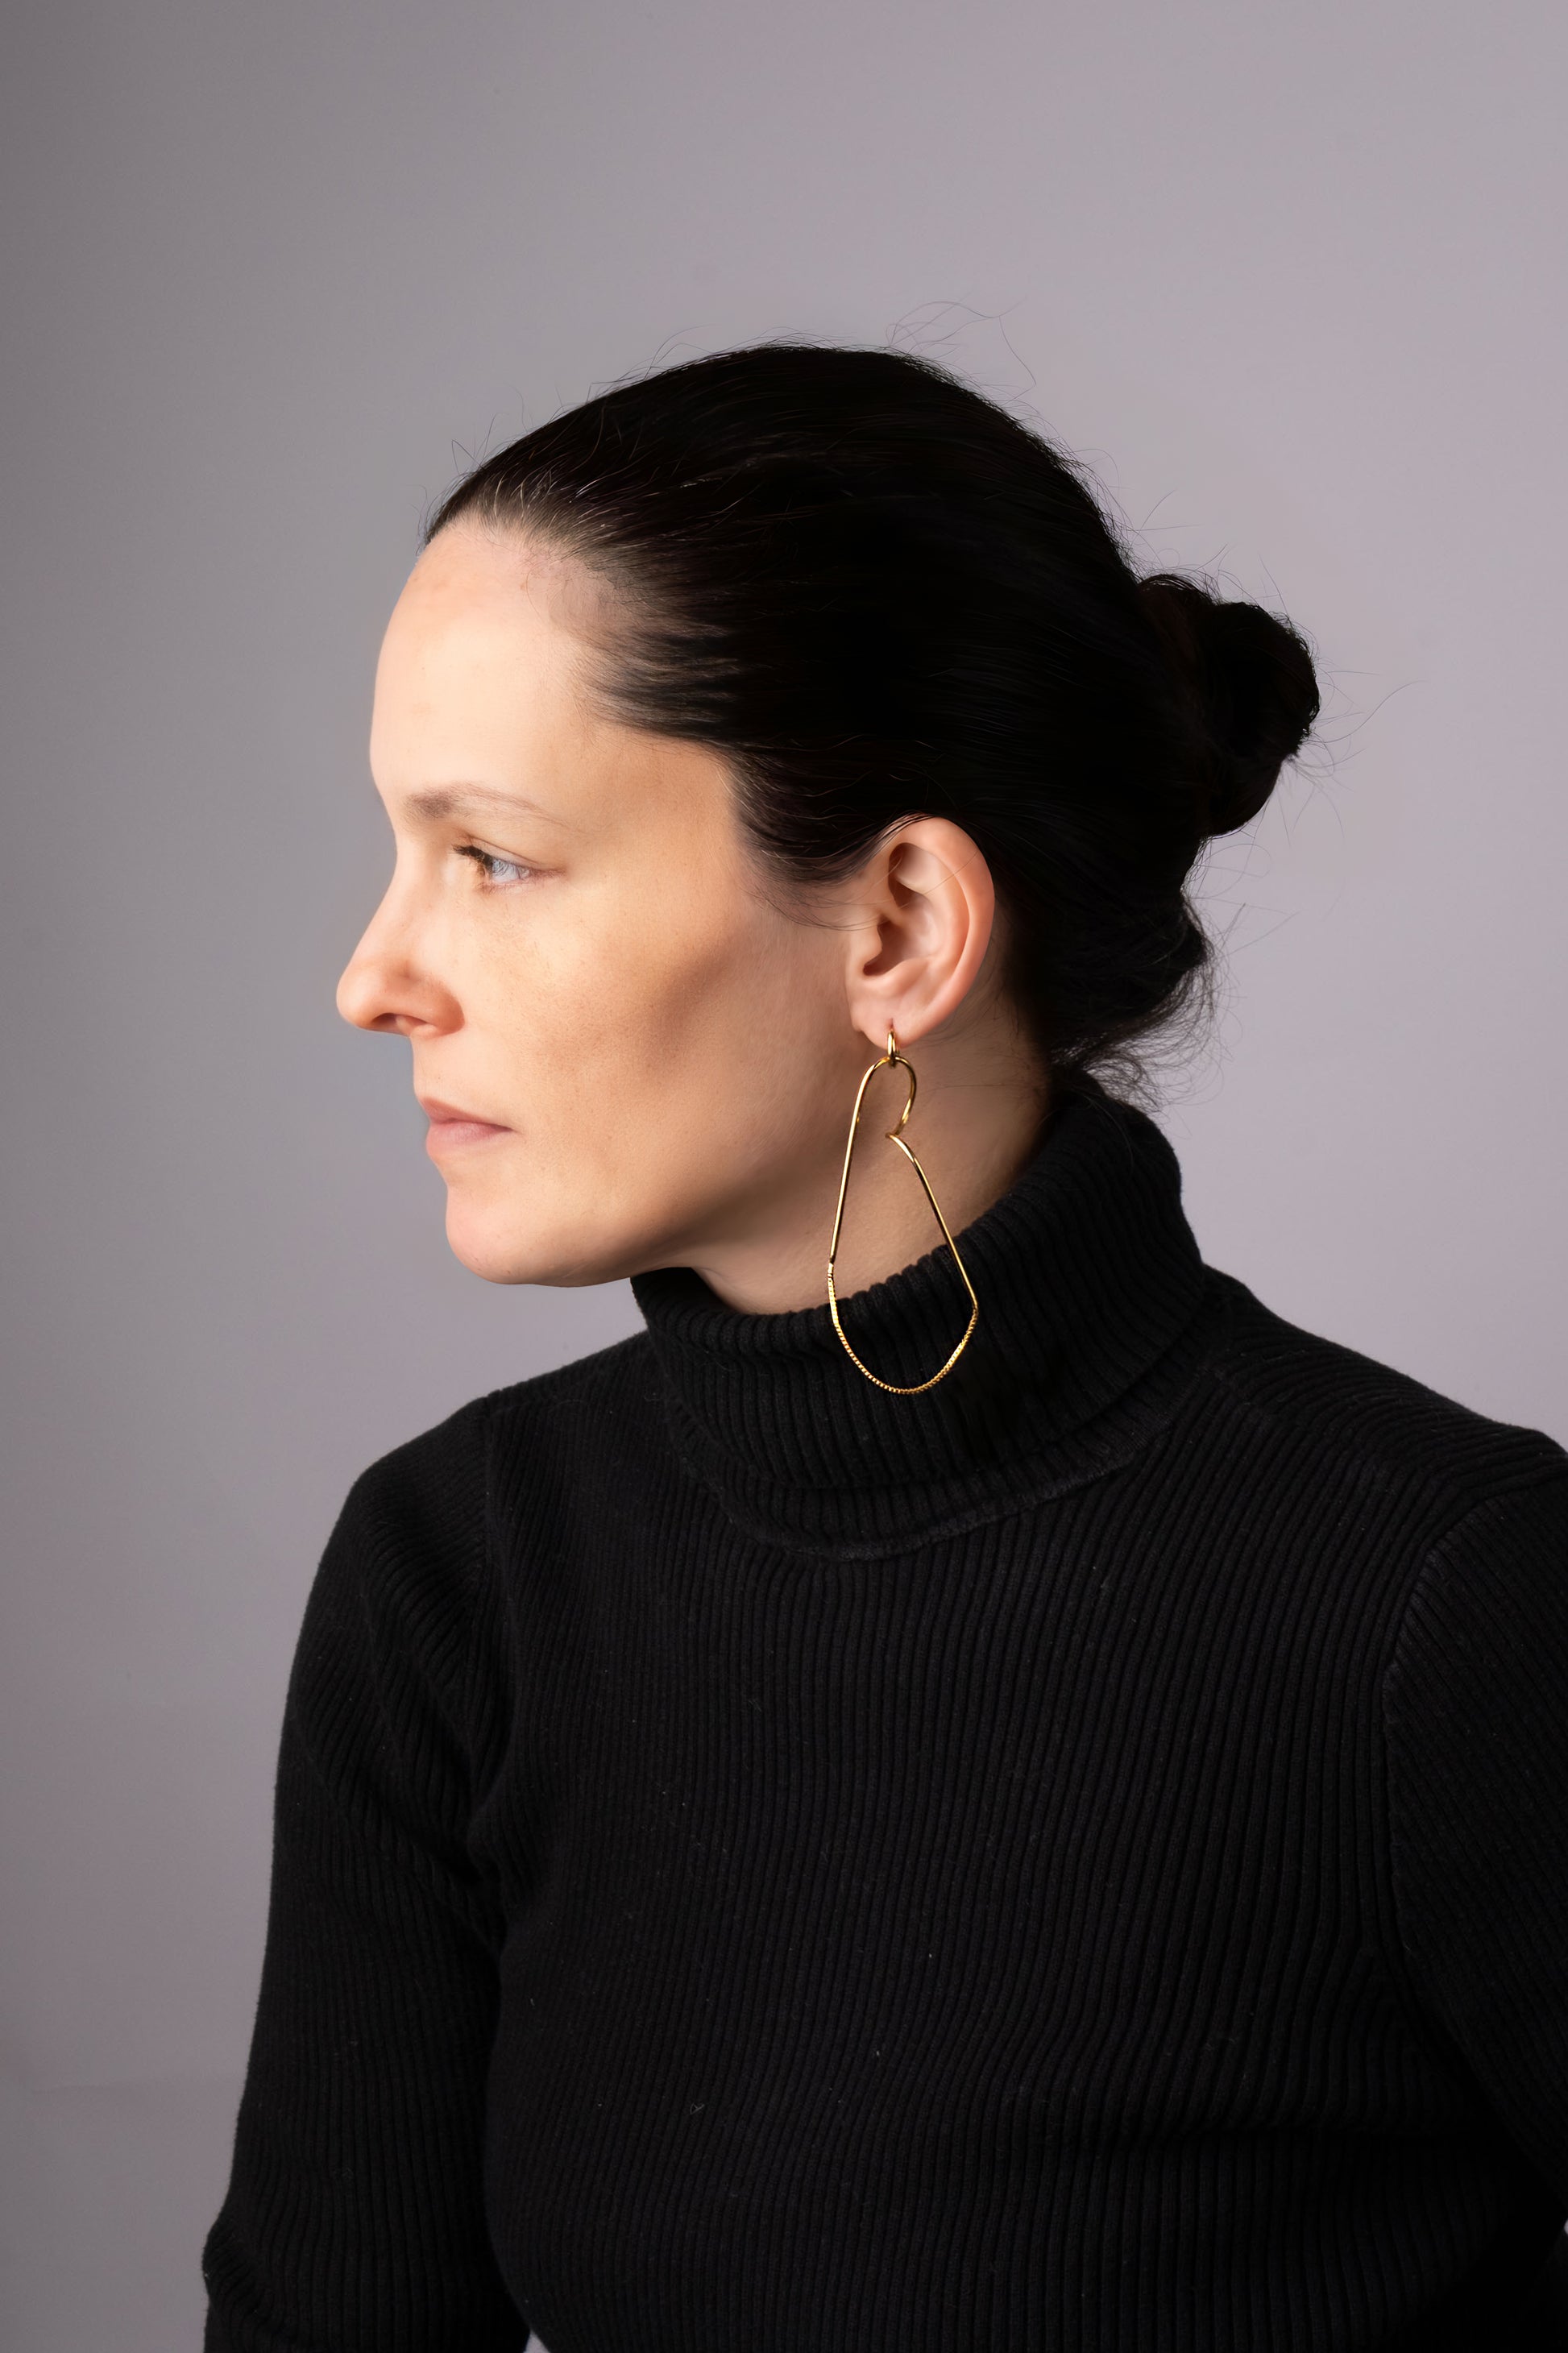 a woman wearing a black sweater and gold hoop earrings